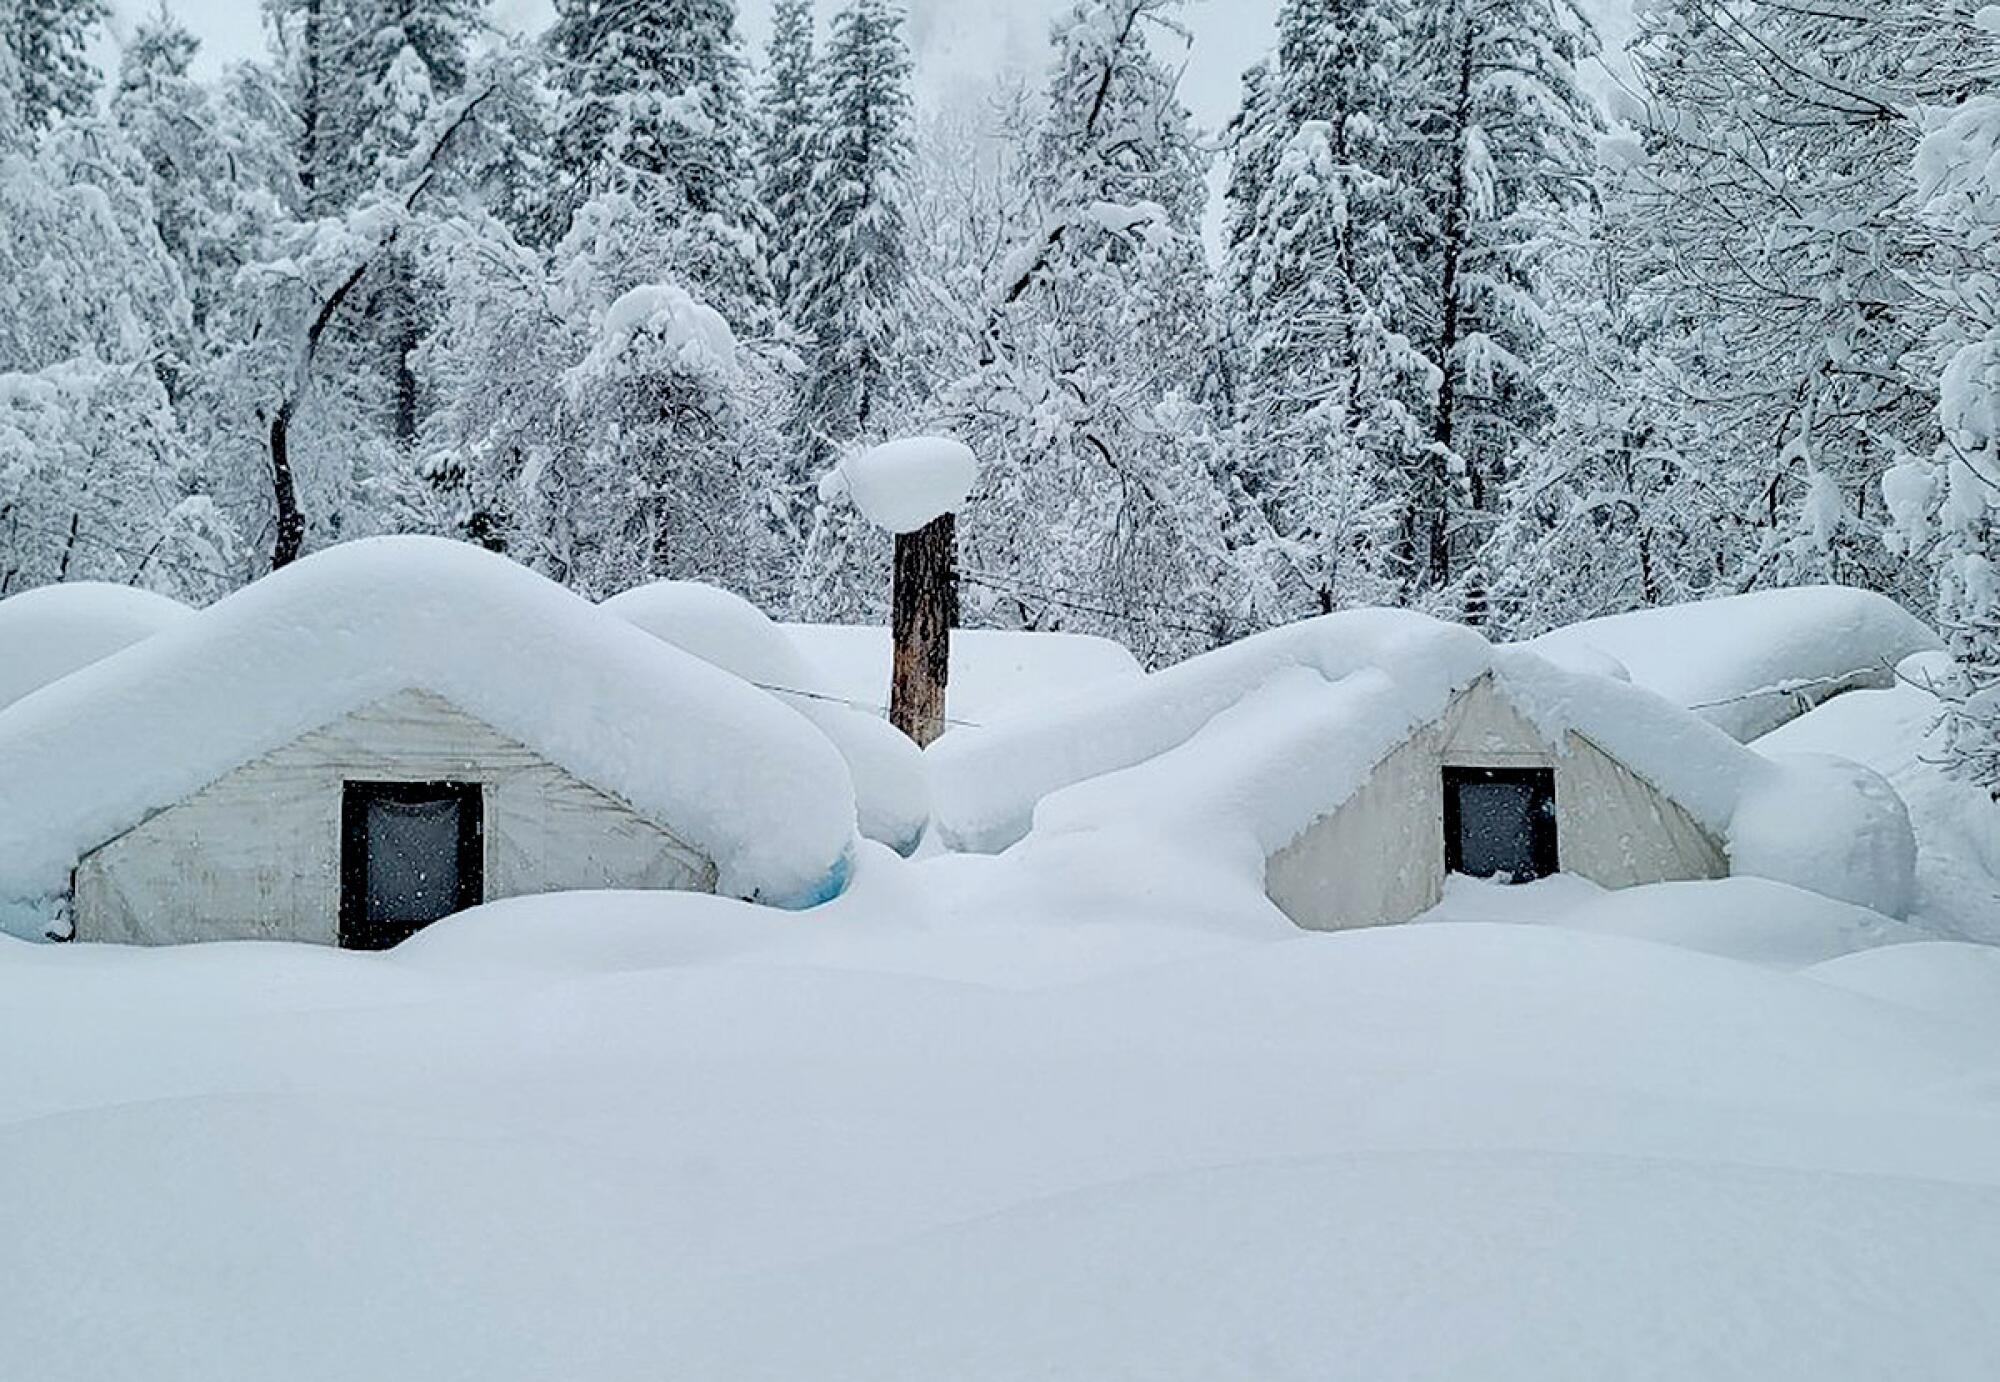 Tent cabins are buried as Yosemite National Park has experienced significant snowfall in all areas of the park.